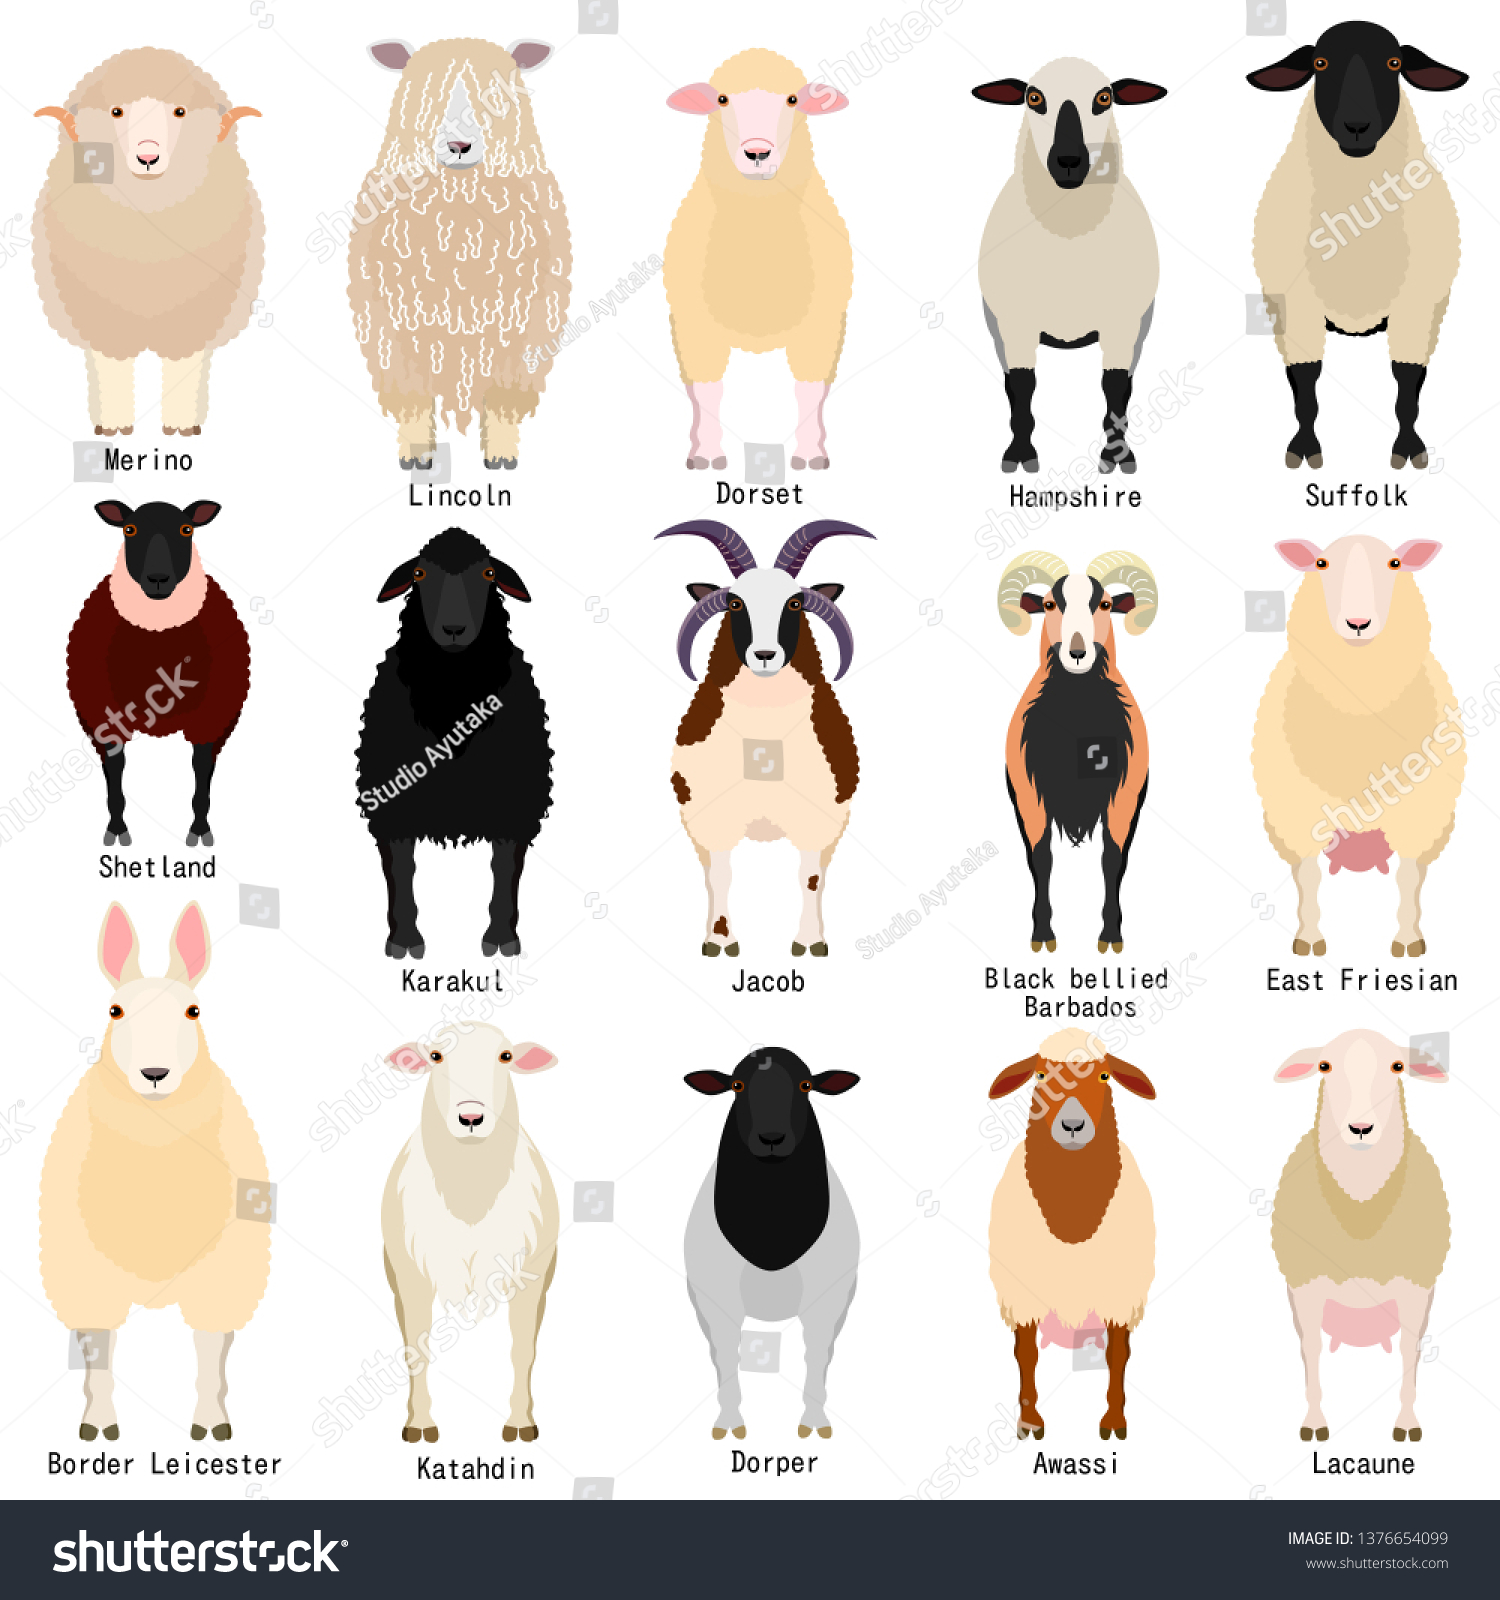 SVG of sheep chart with breeds name  svg